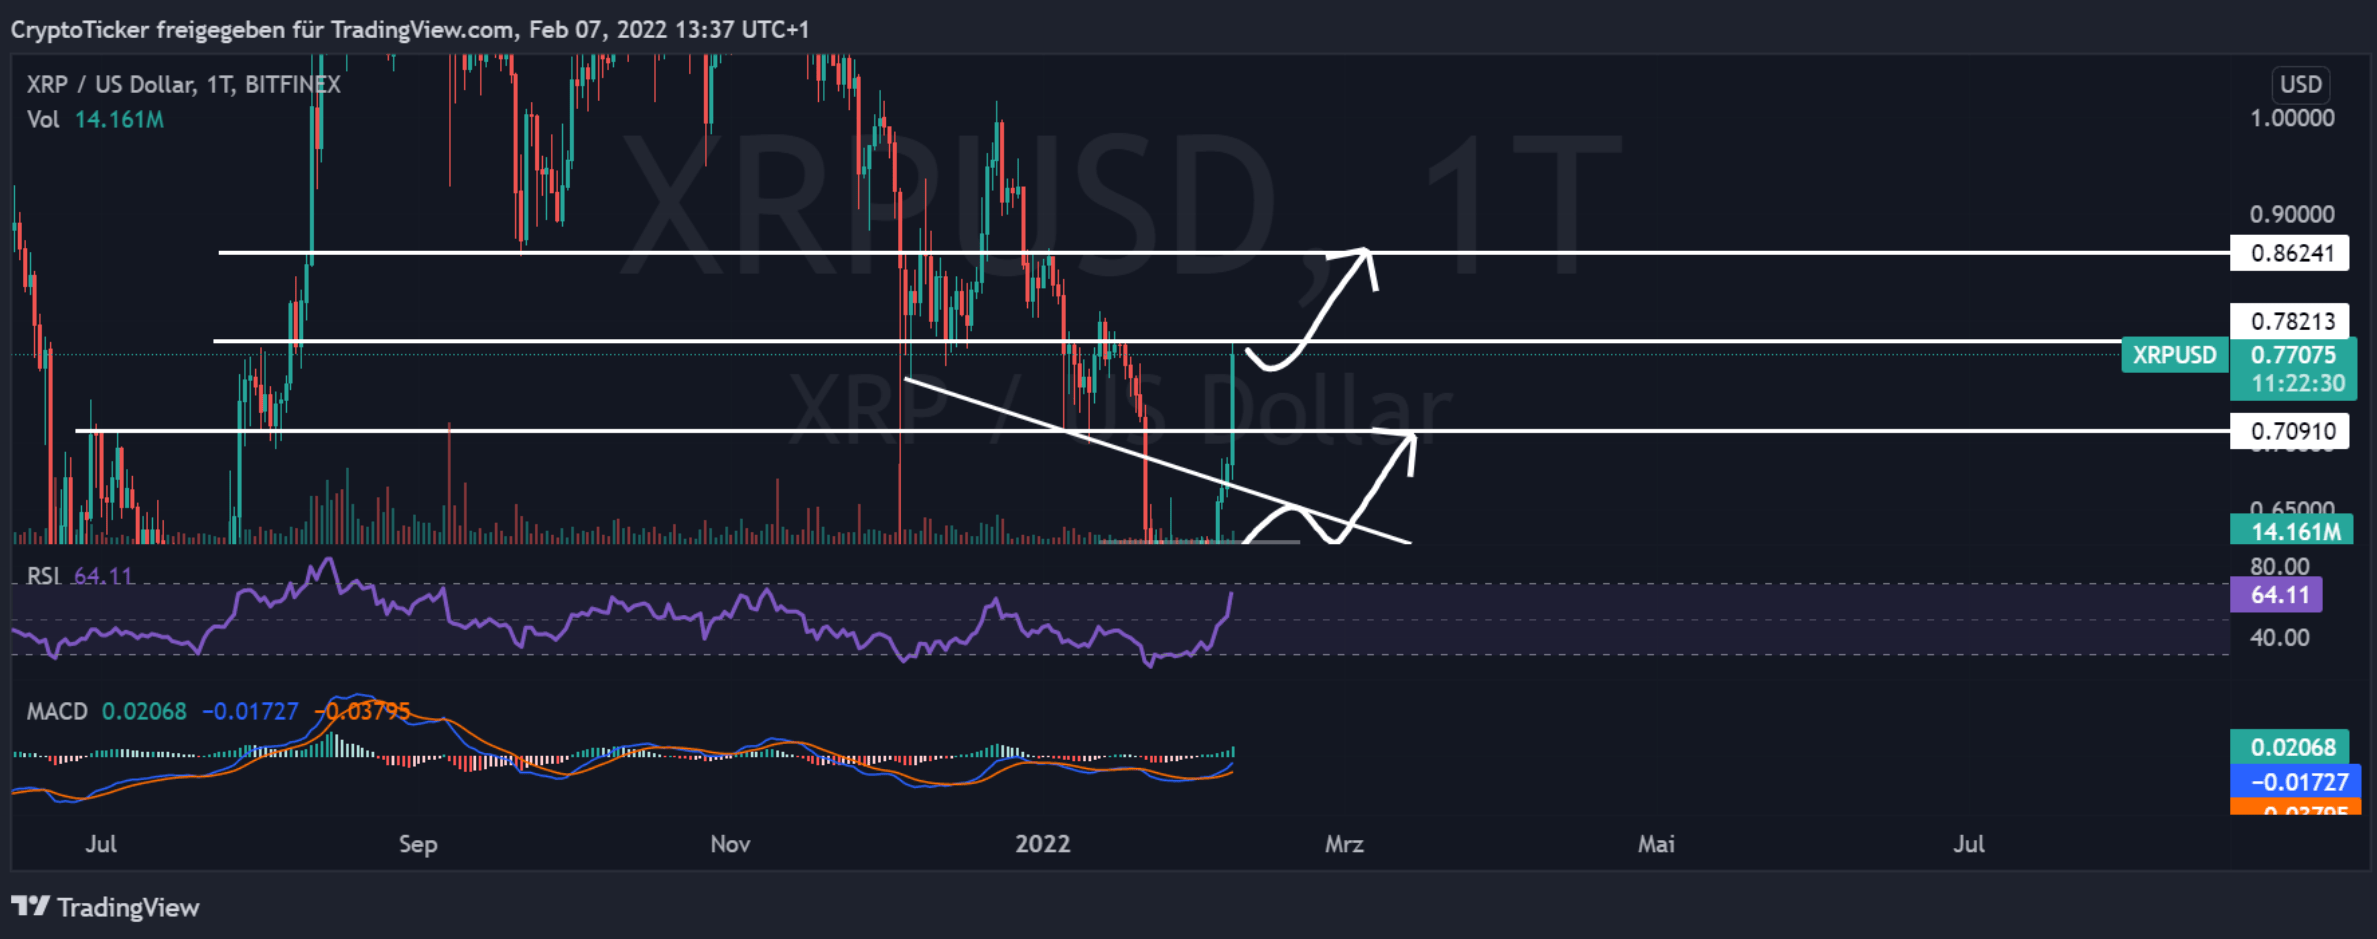 XRP/USD 1-day chart showing Ripple token indicators